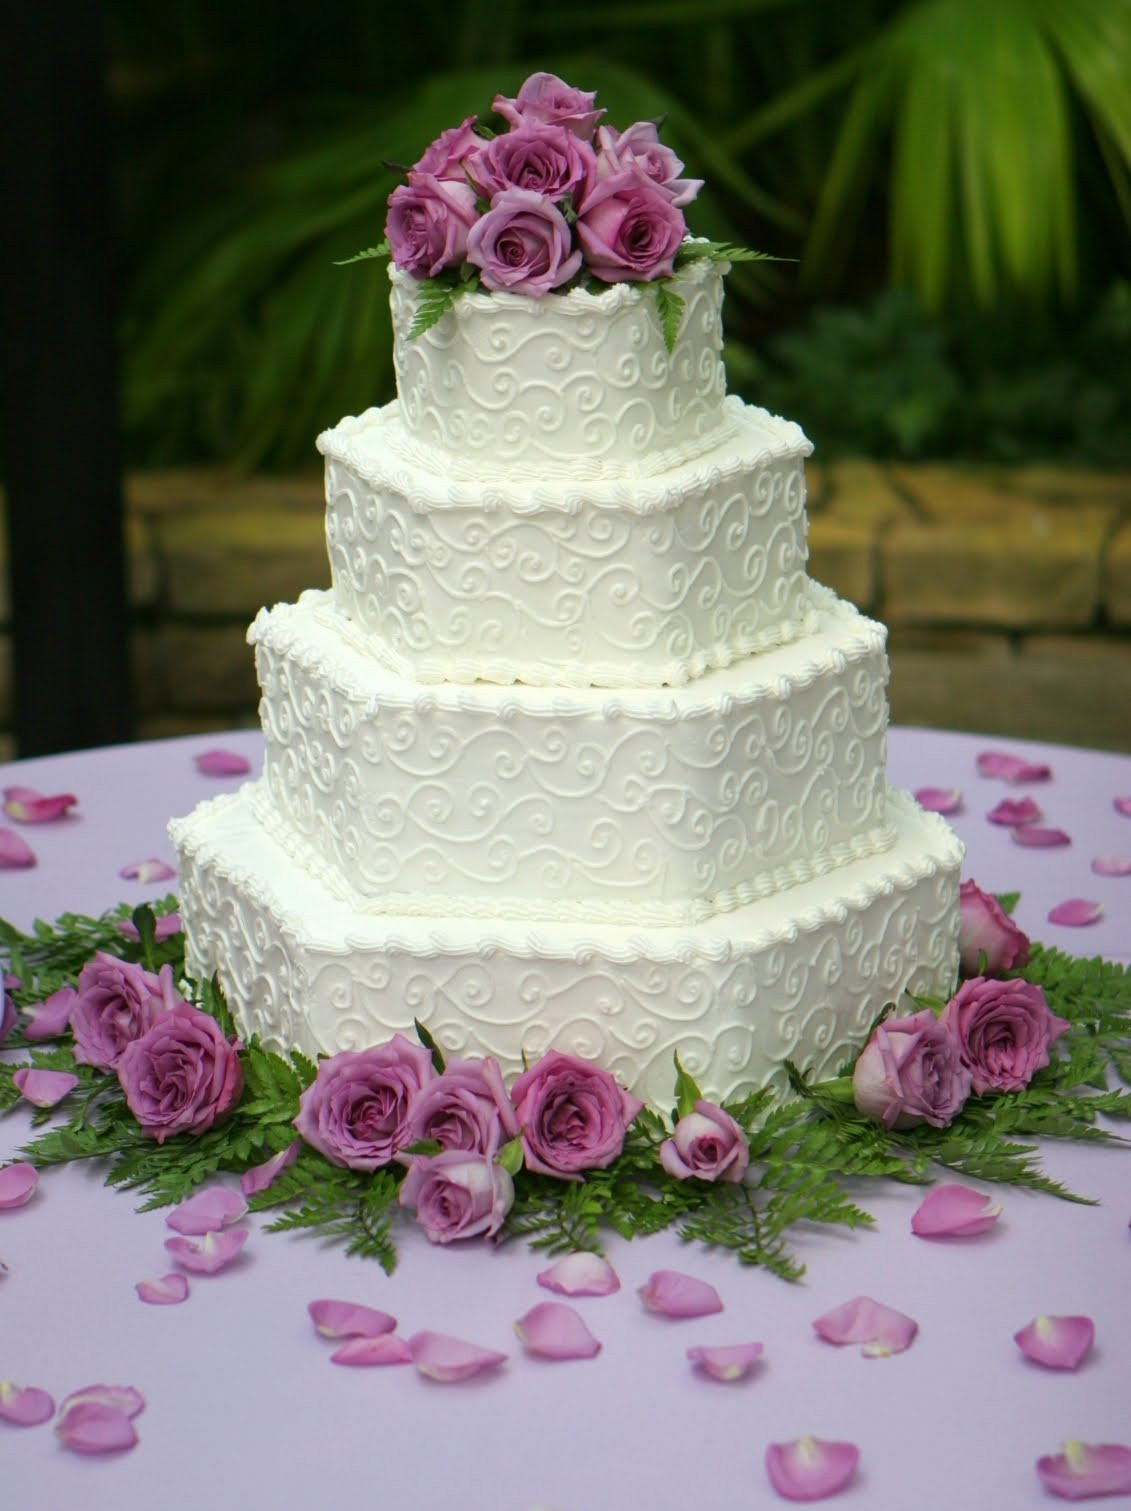 Costco Wedding Cakes Designs
 When you purchase Costco bakery wedding cakes takes after